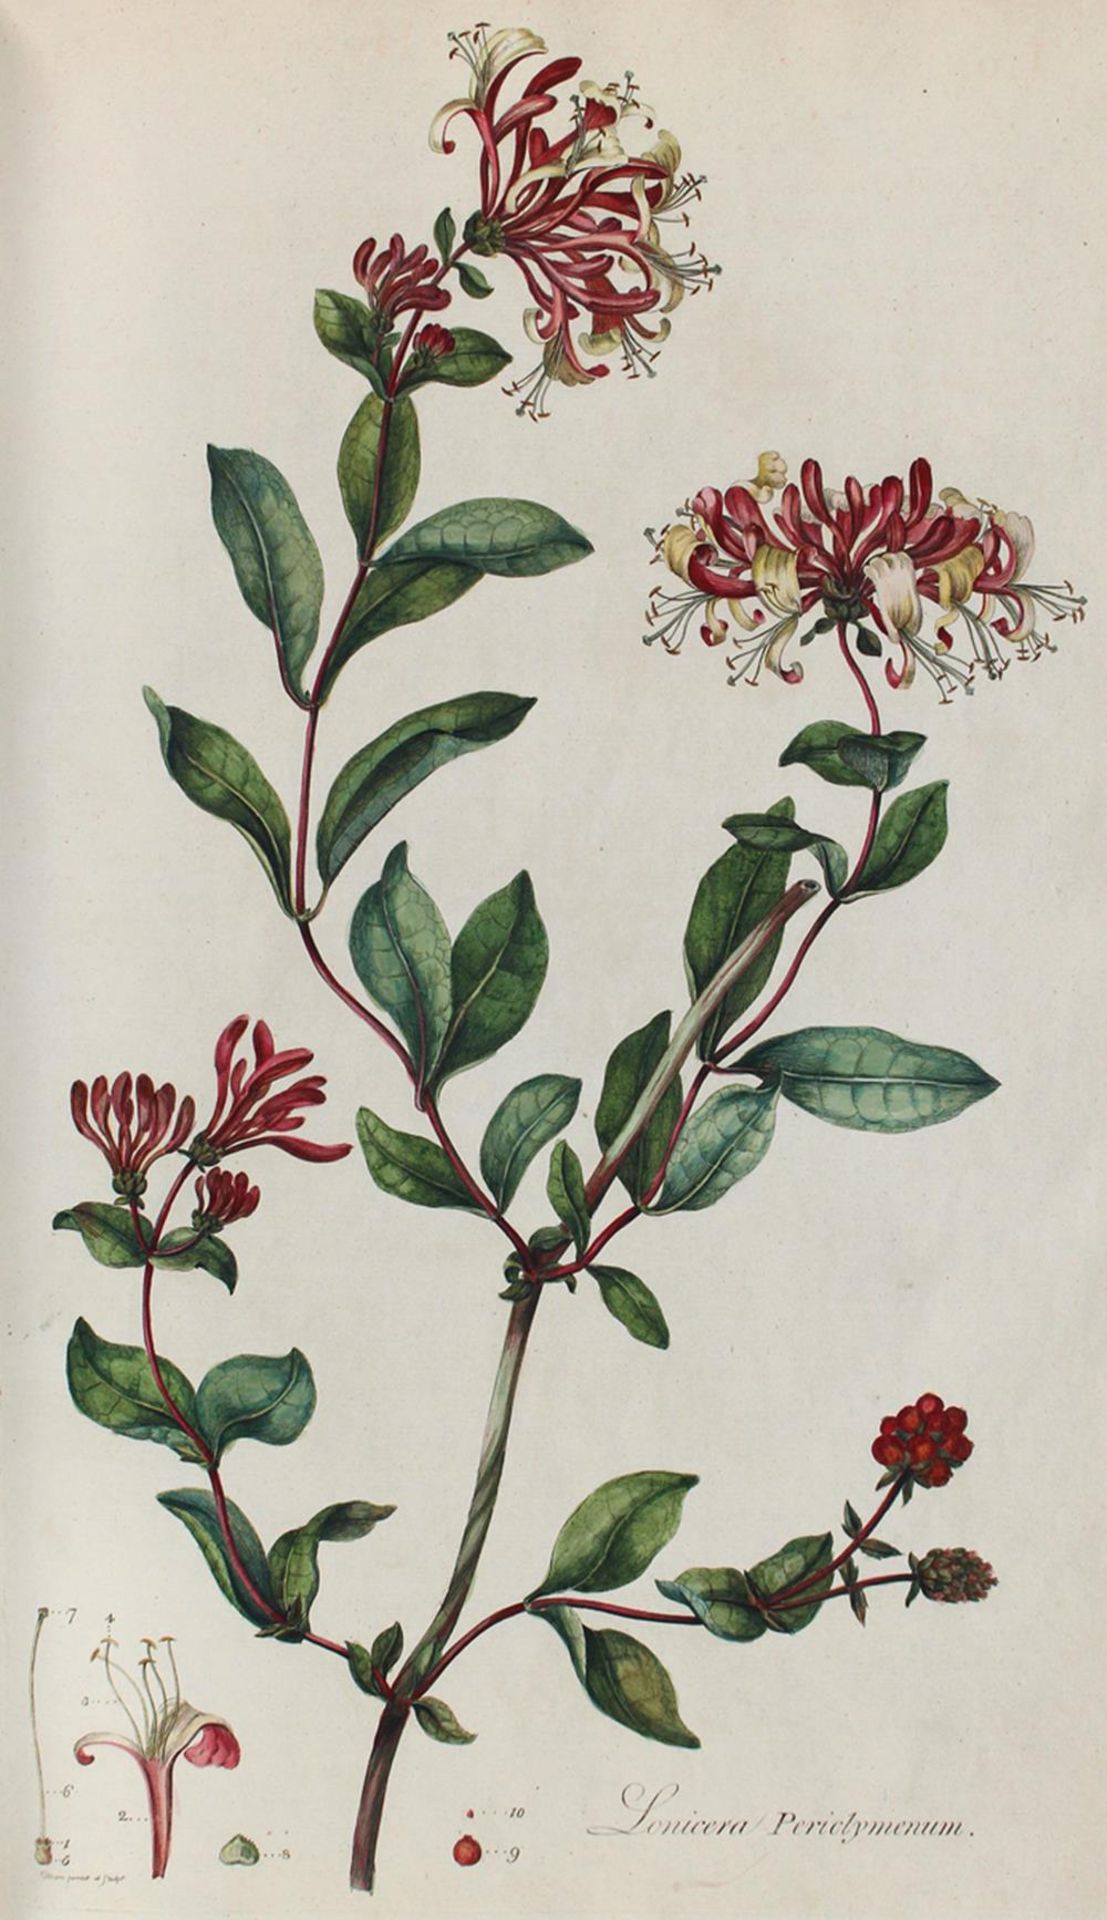 Curtis,W.Curtis,W. Flora Londiensis; or, plates and descriptions of such plants as growCurt